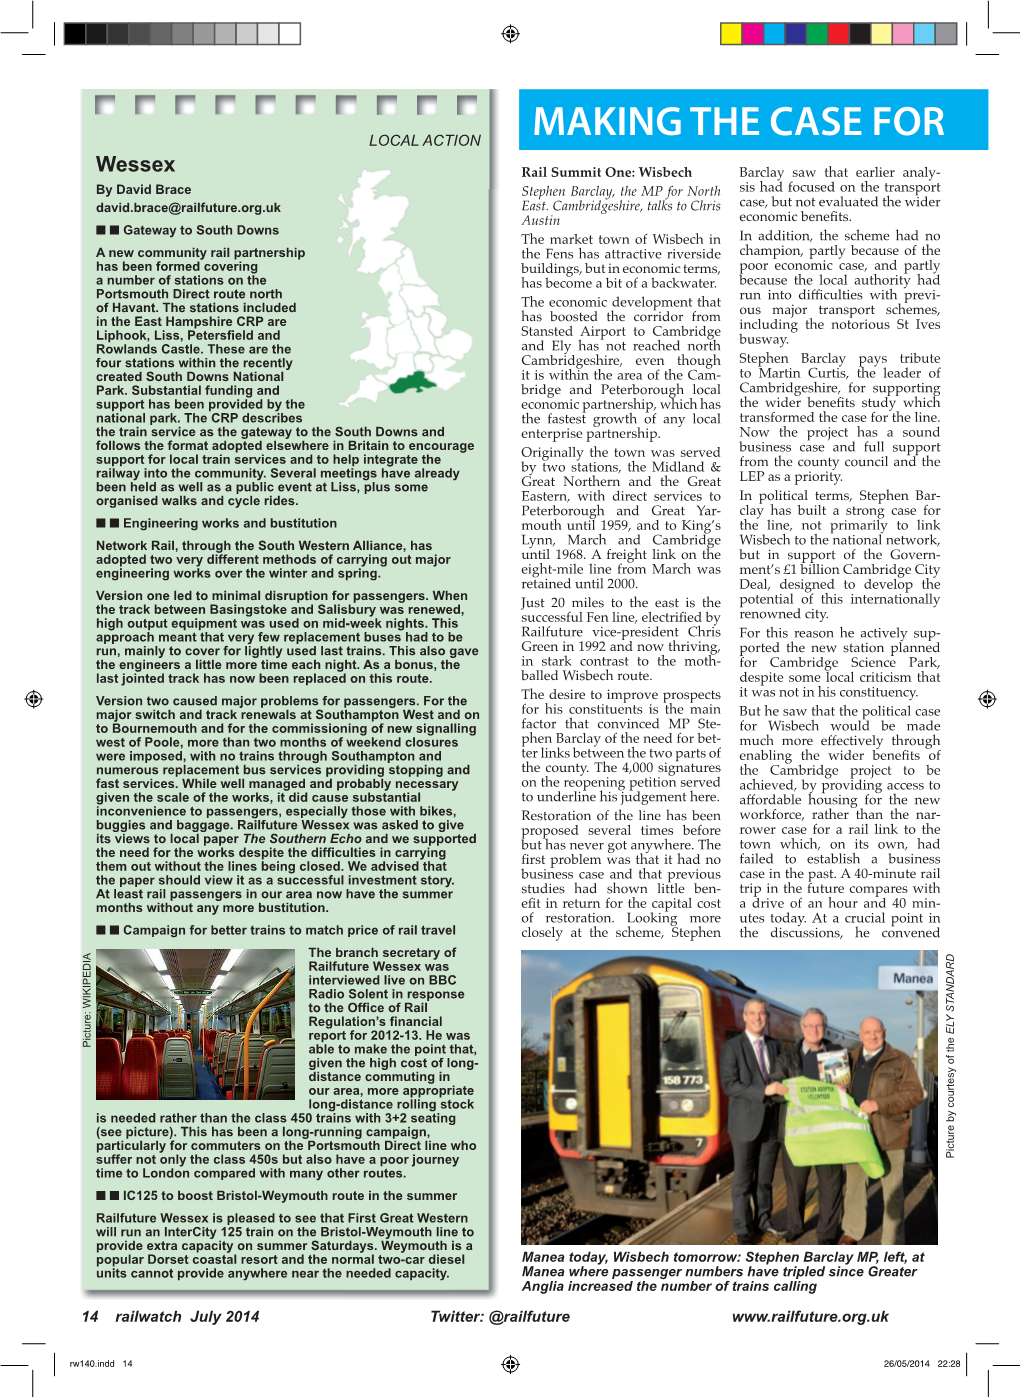 Making the Case for Rail in the Fens